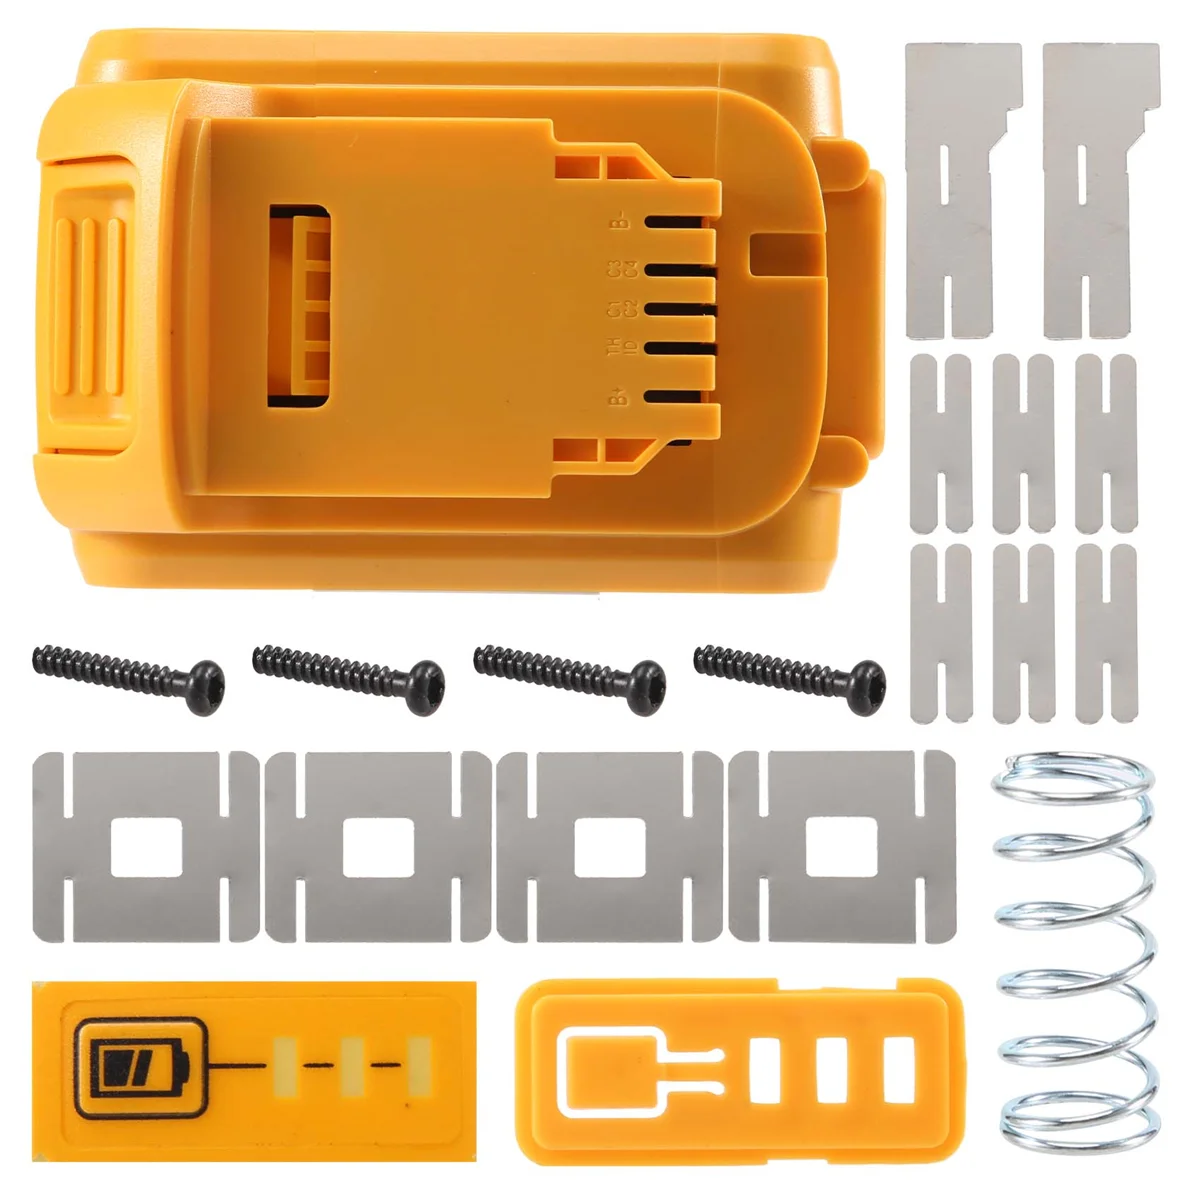 

Battery Replacement Plastic Case for DeWalt 20V DCB201,DCB203,DCB204,DCB200 18V Li-Ion Battery Cover Parts for 3A 4A 5A